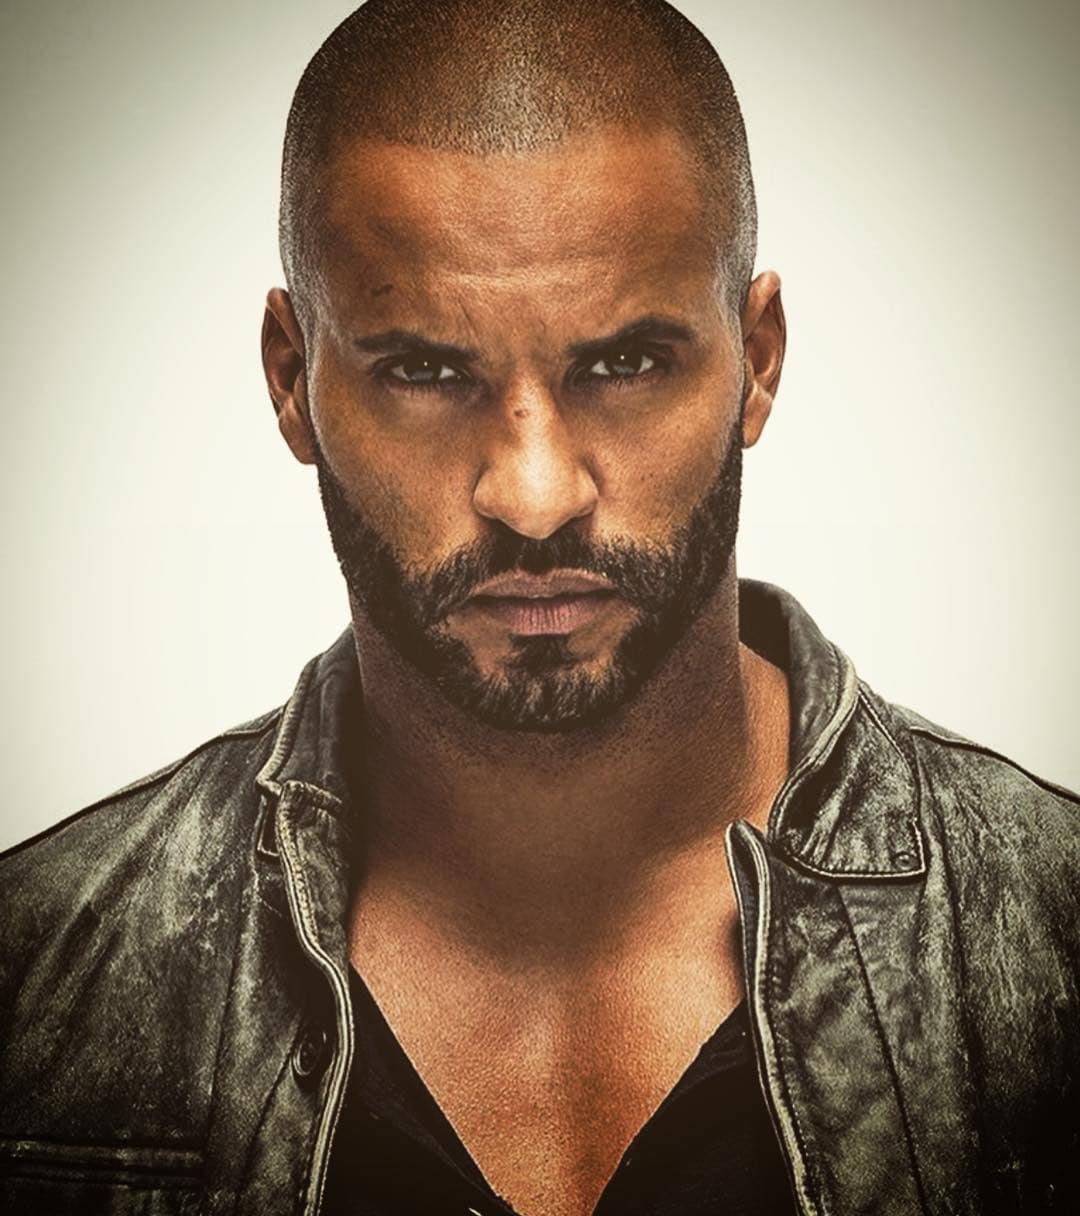 Ricky dating is who whittle Ricky Whittle